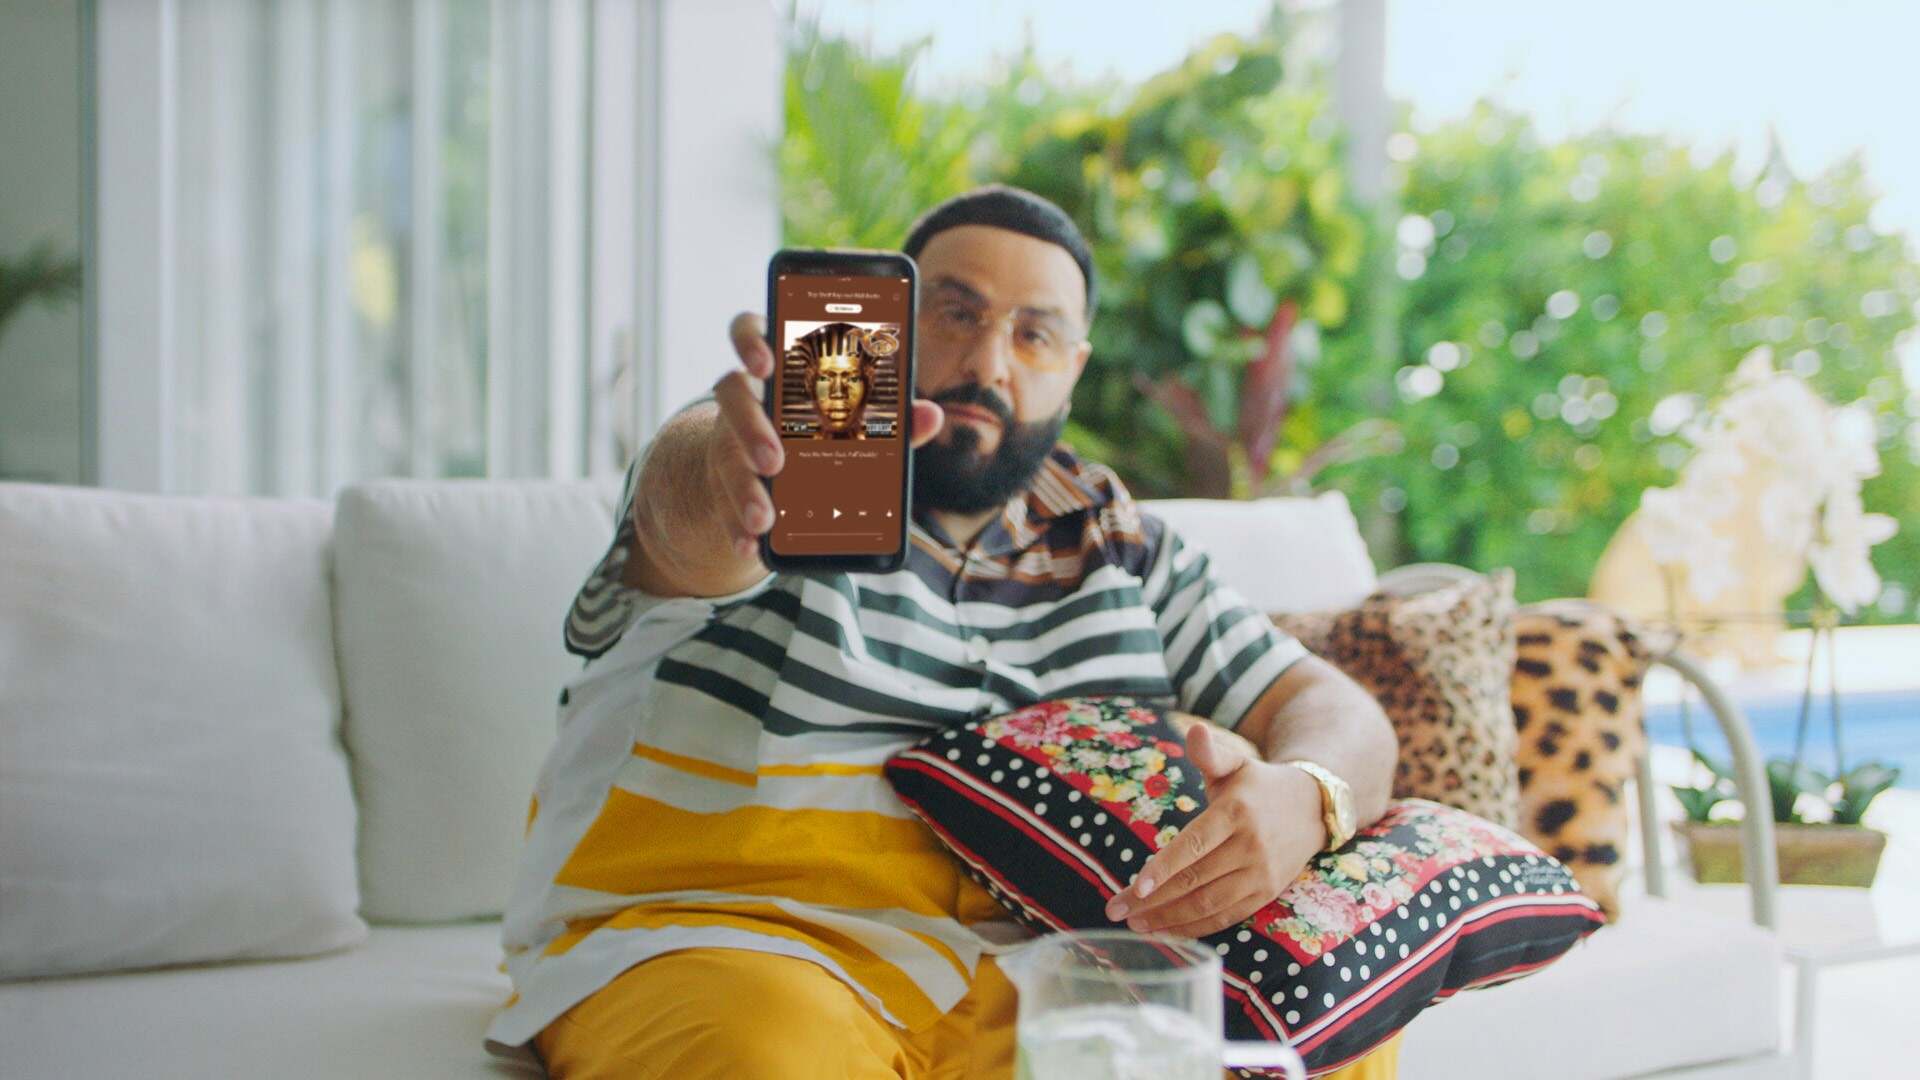 DJ Khaled’s Love Of Pandora Inspires Trio Of Ads In New National Brand Campaign